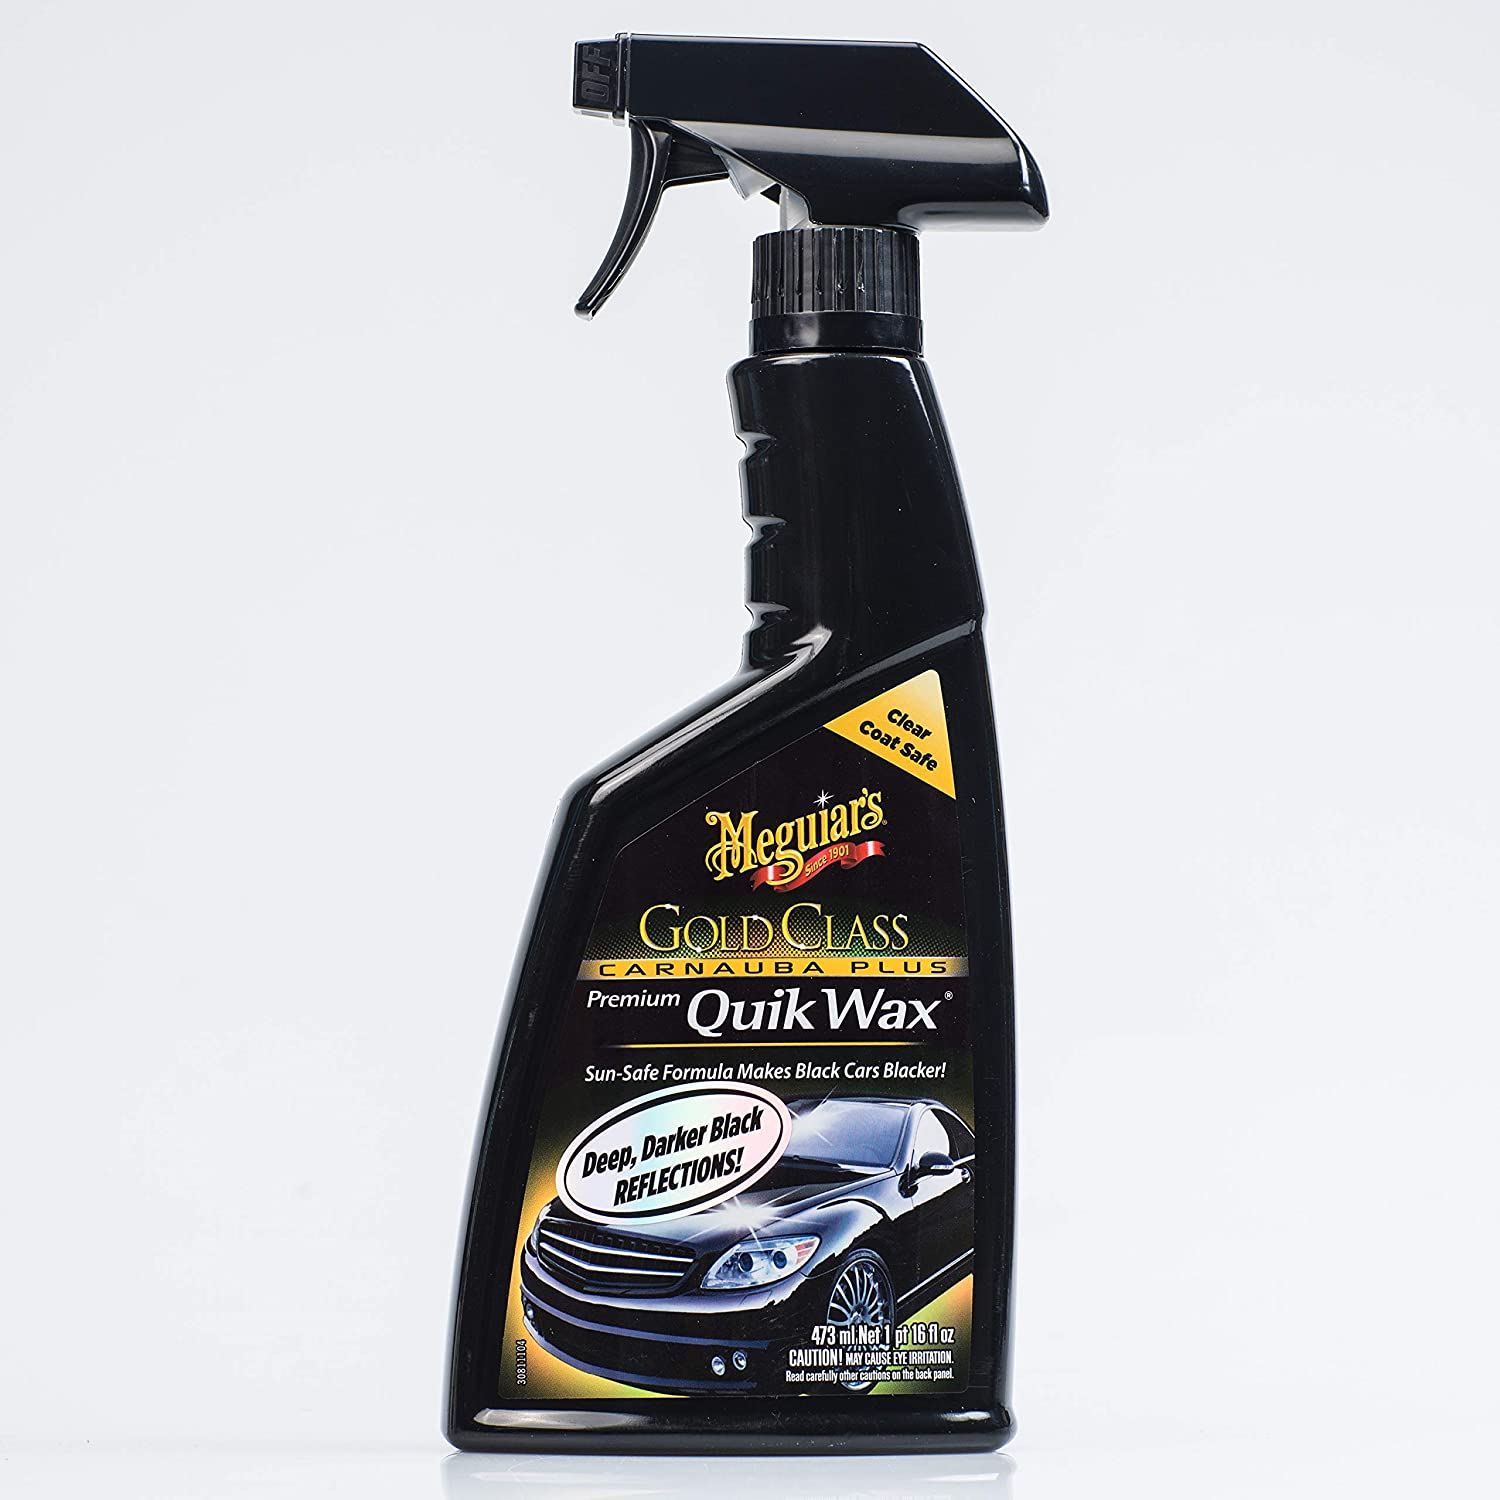 Best Wax for Black Cars (Review & Buying Guide) in 2020 - The Drive